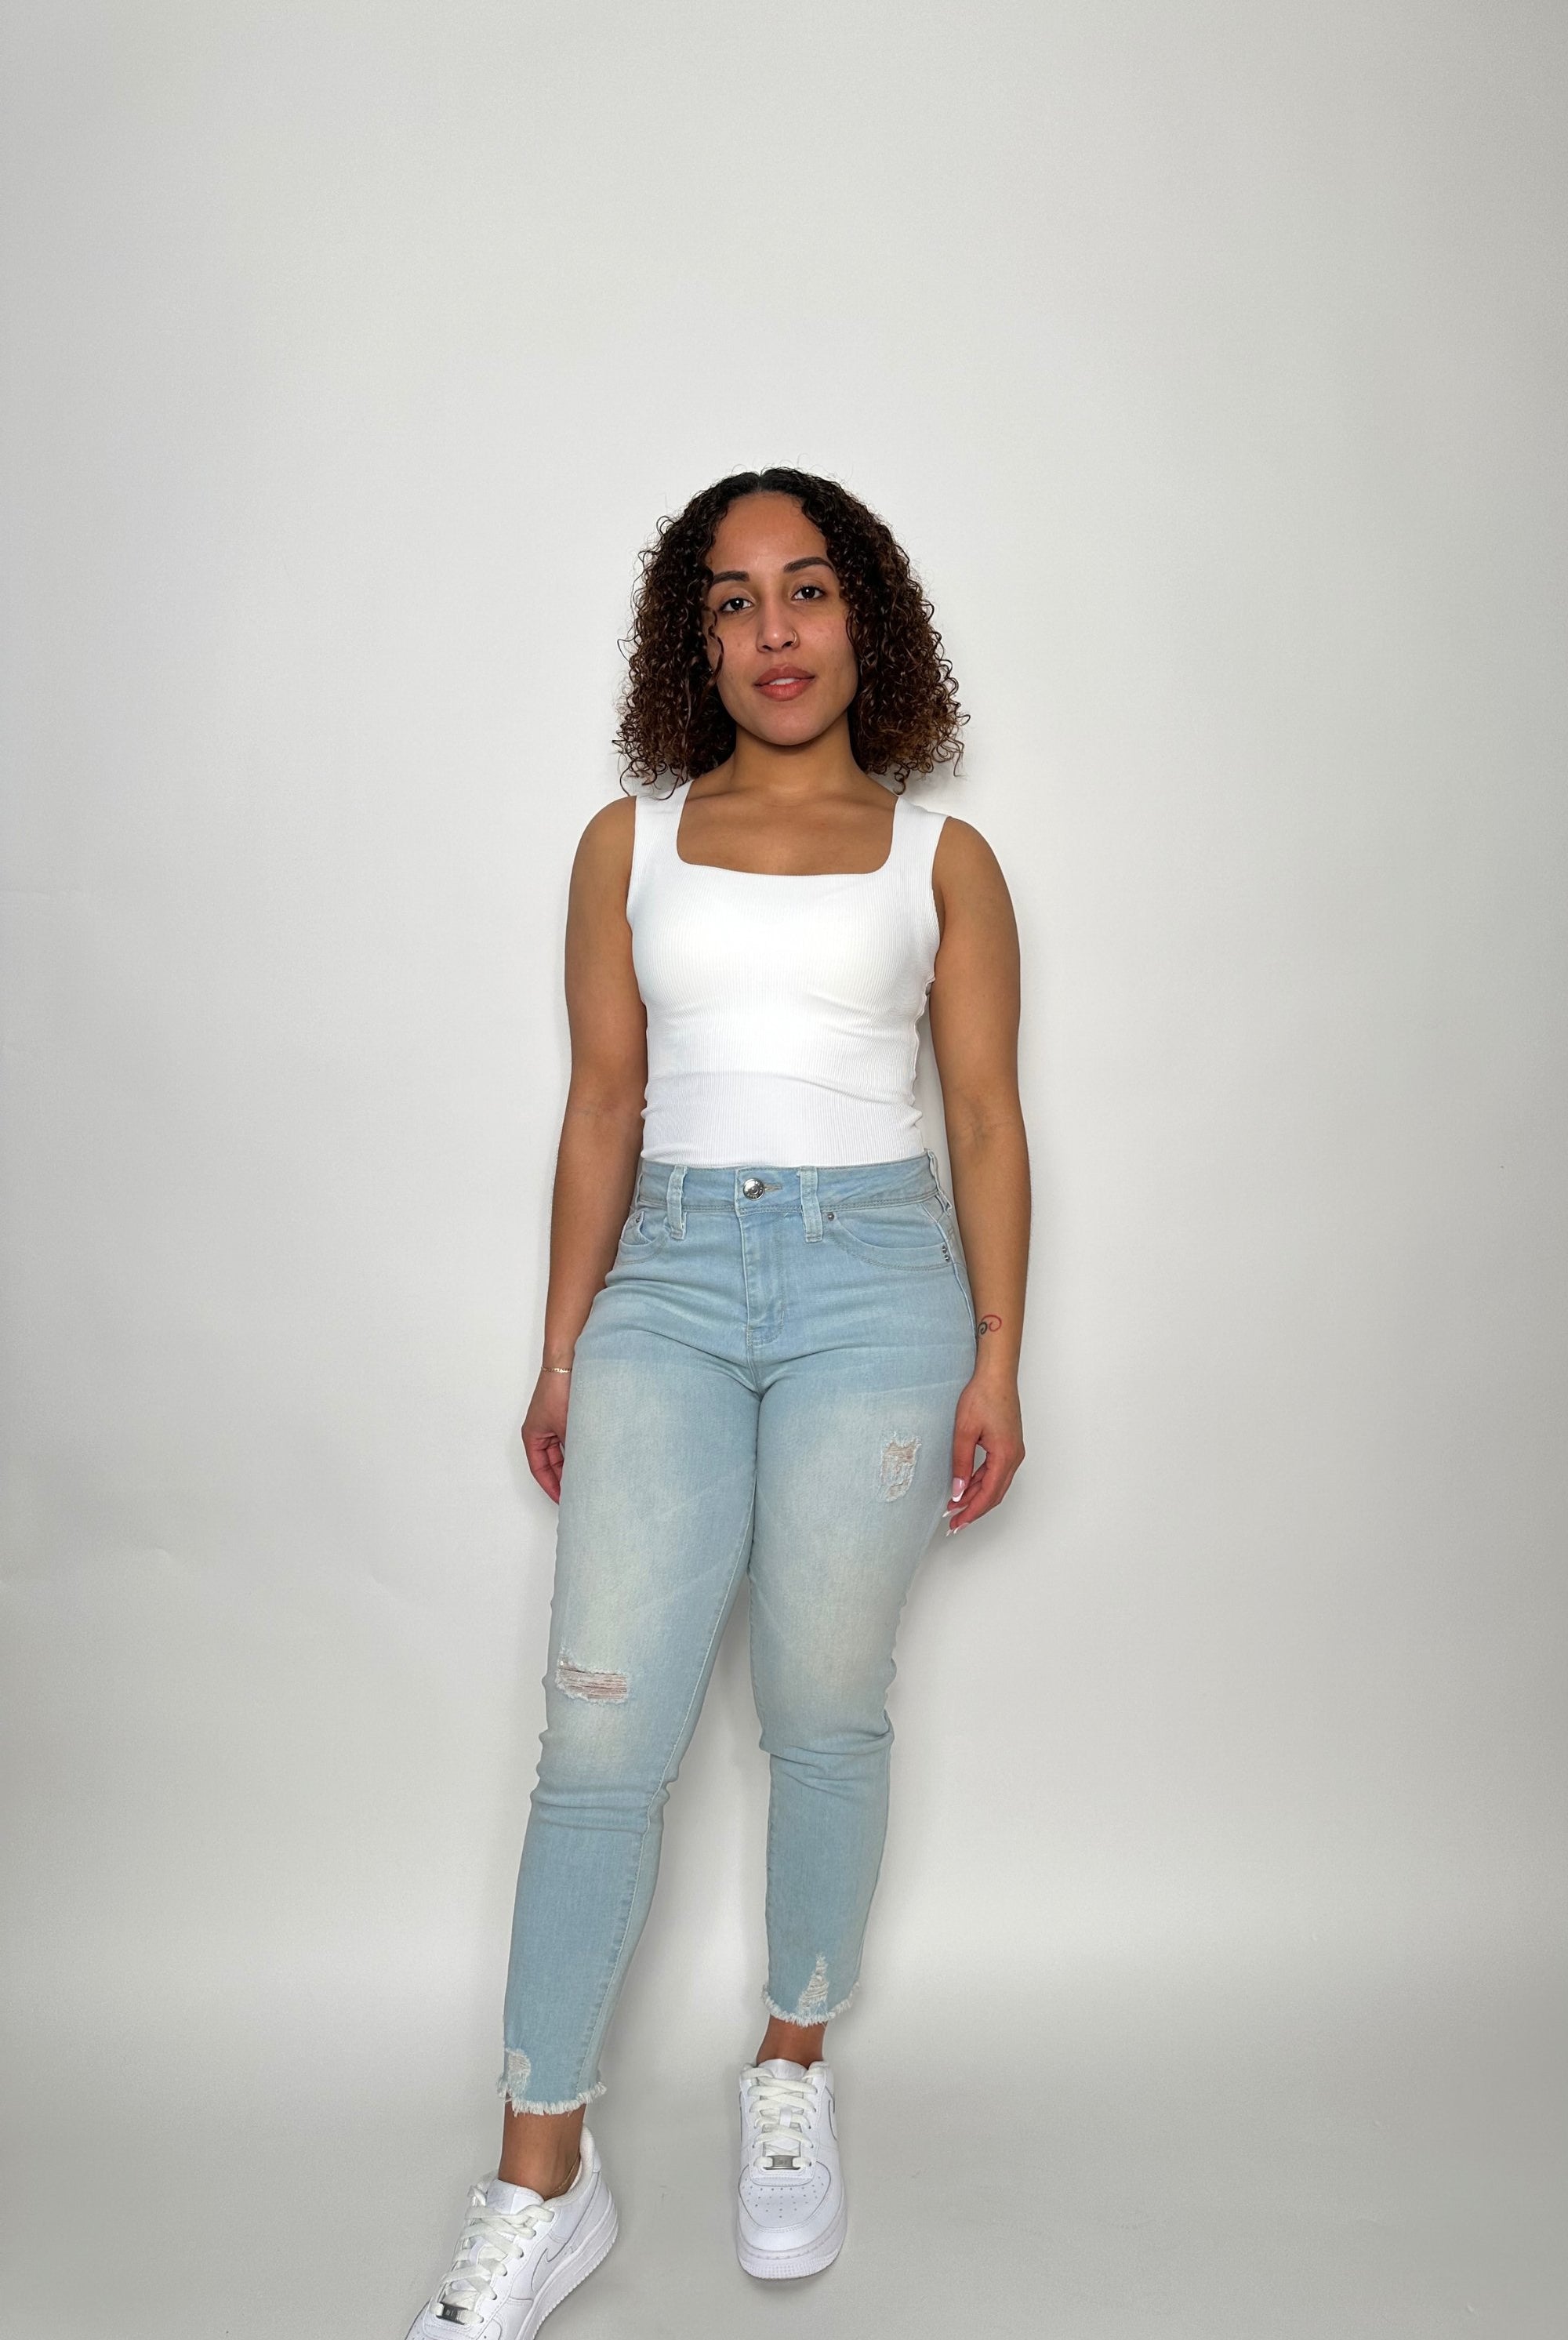 NatxCustomStyle Jeans | Curvy Cropped Jean| Skinny jeans